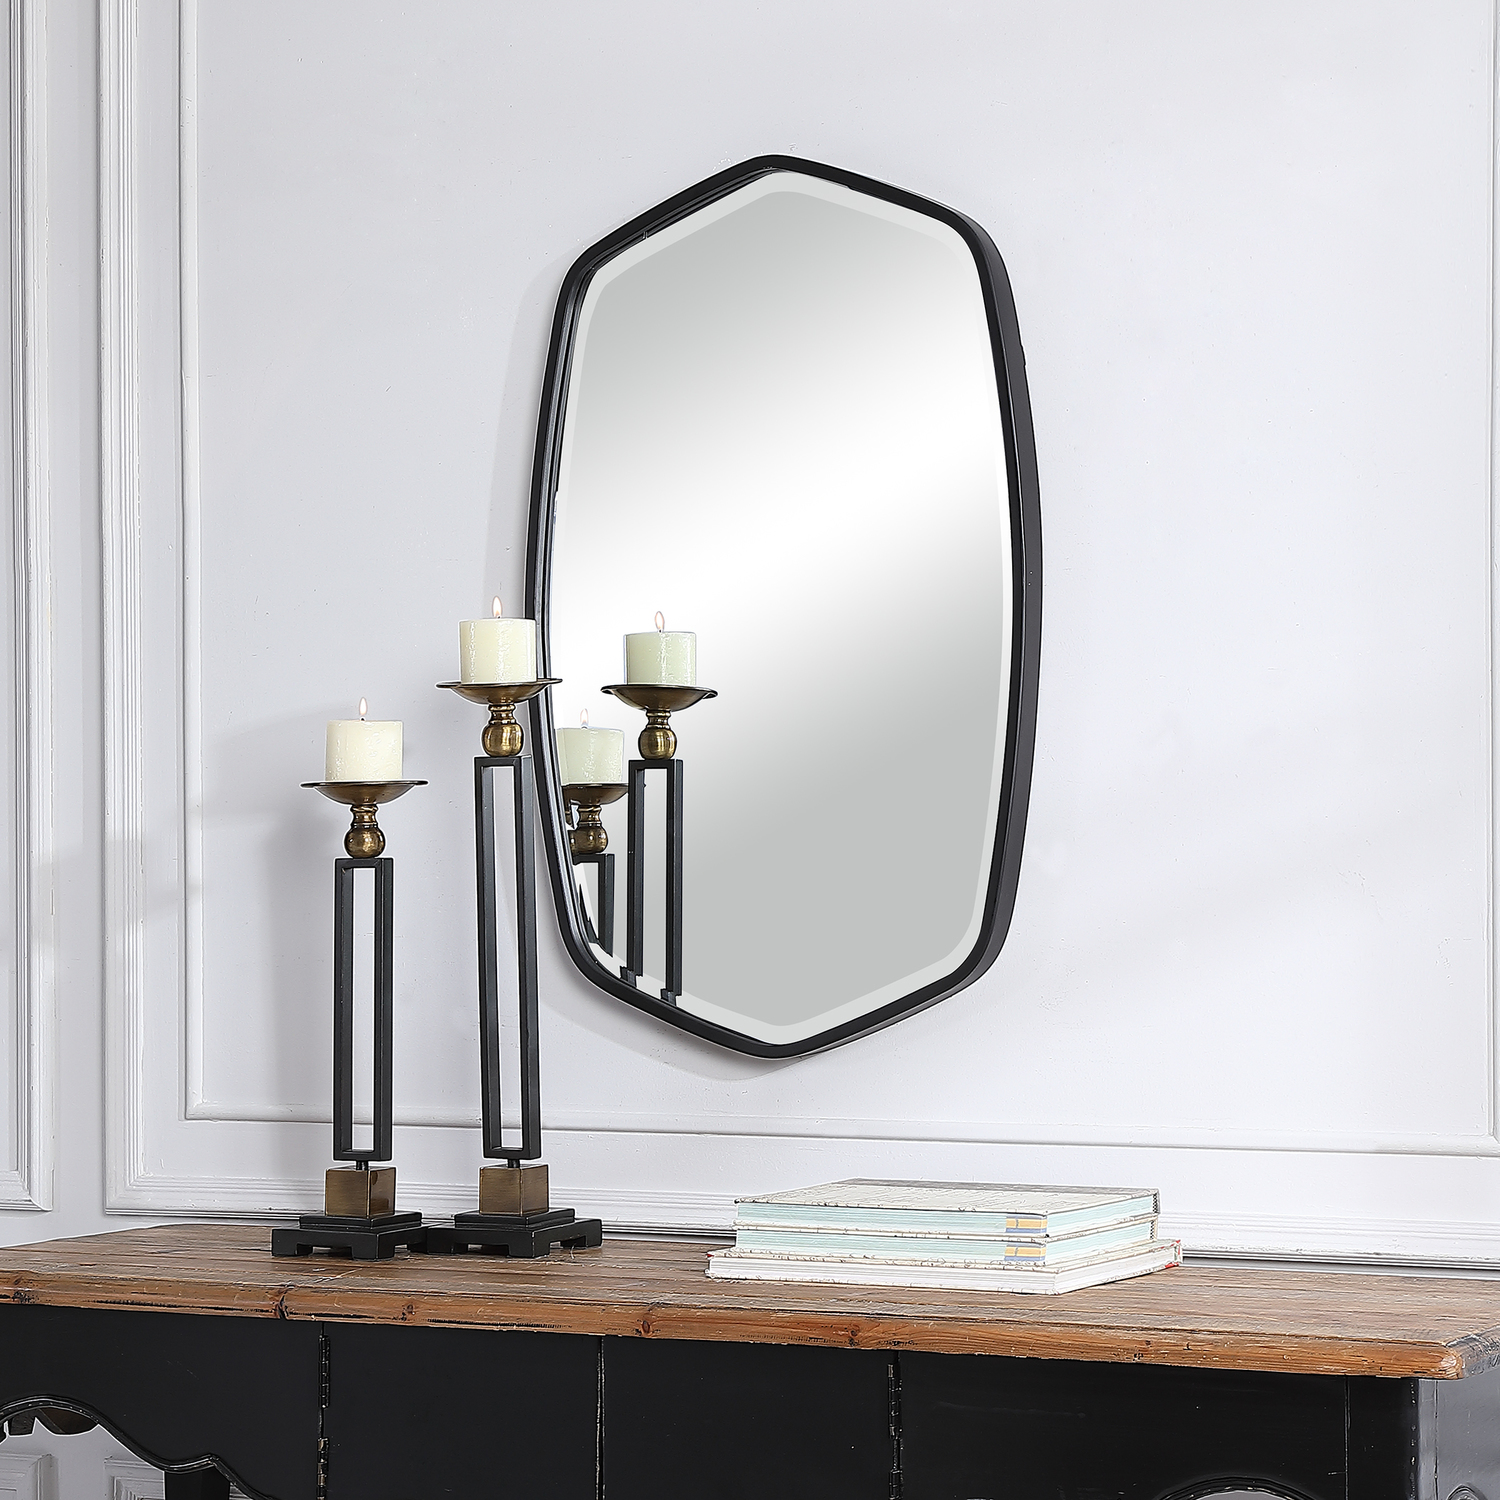 decorative mirror lights Uttermost Black Iron Mirror This Hand Forged Iron Mirror Frame Features A Unique Shape With Elegant Curves, Finished In A Streamlined Satin Black. Mirror Has A Generous 1 1/4" Bevel.